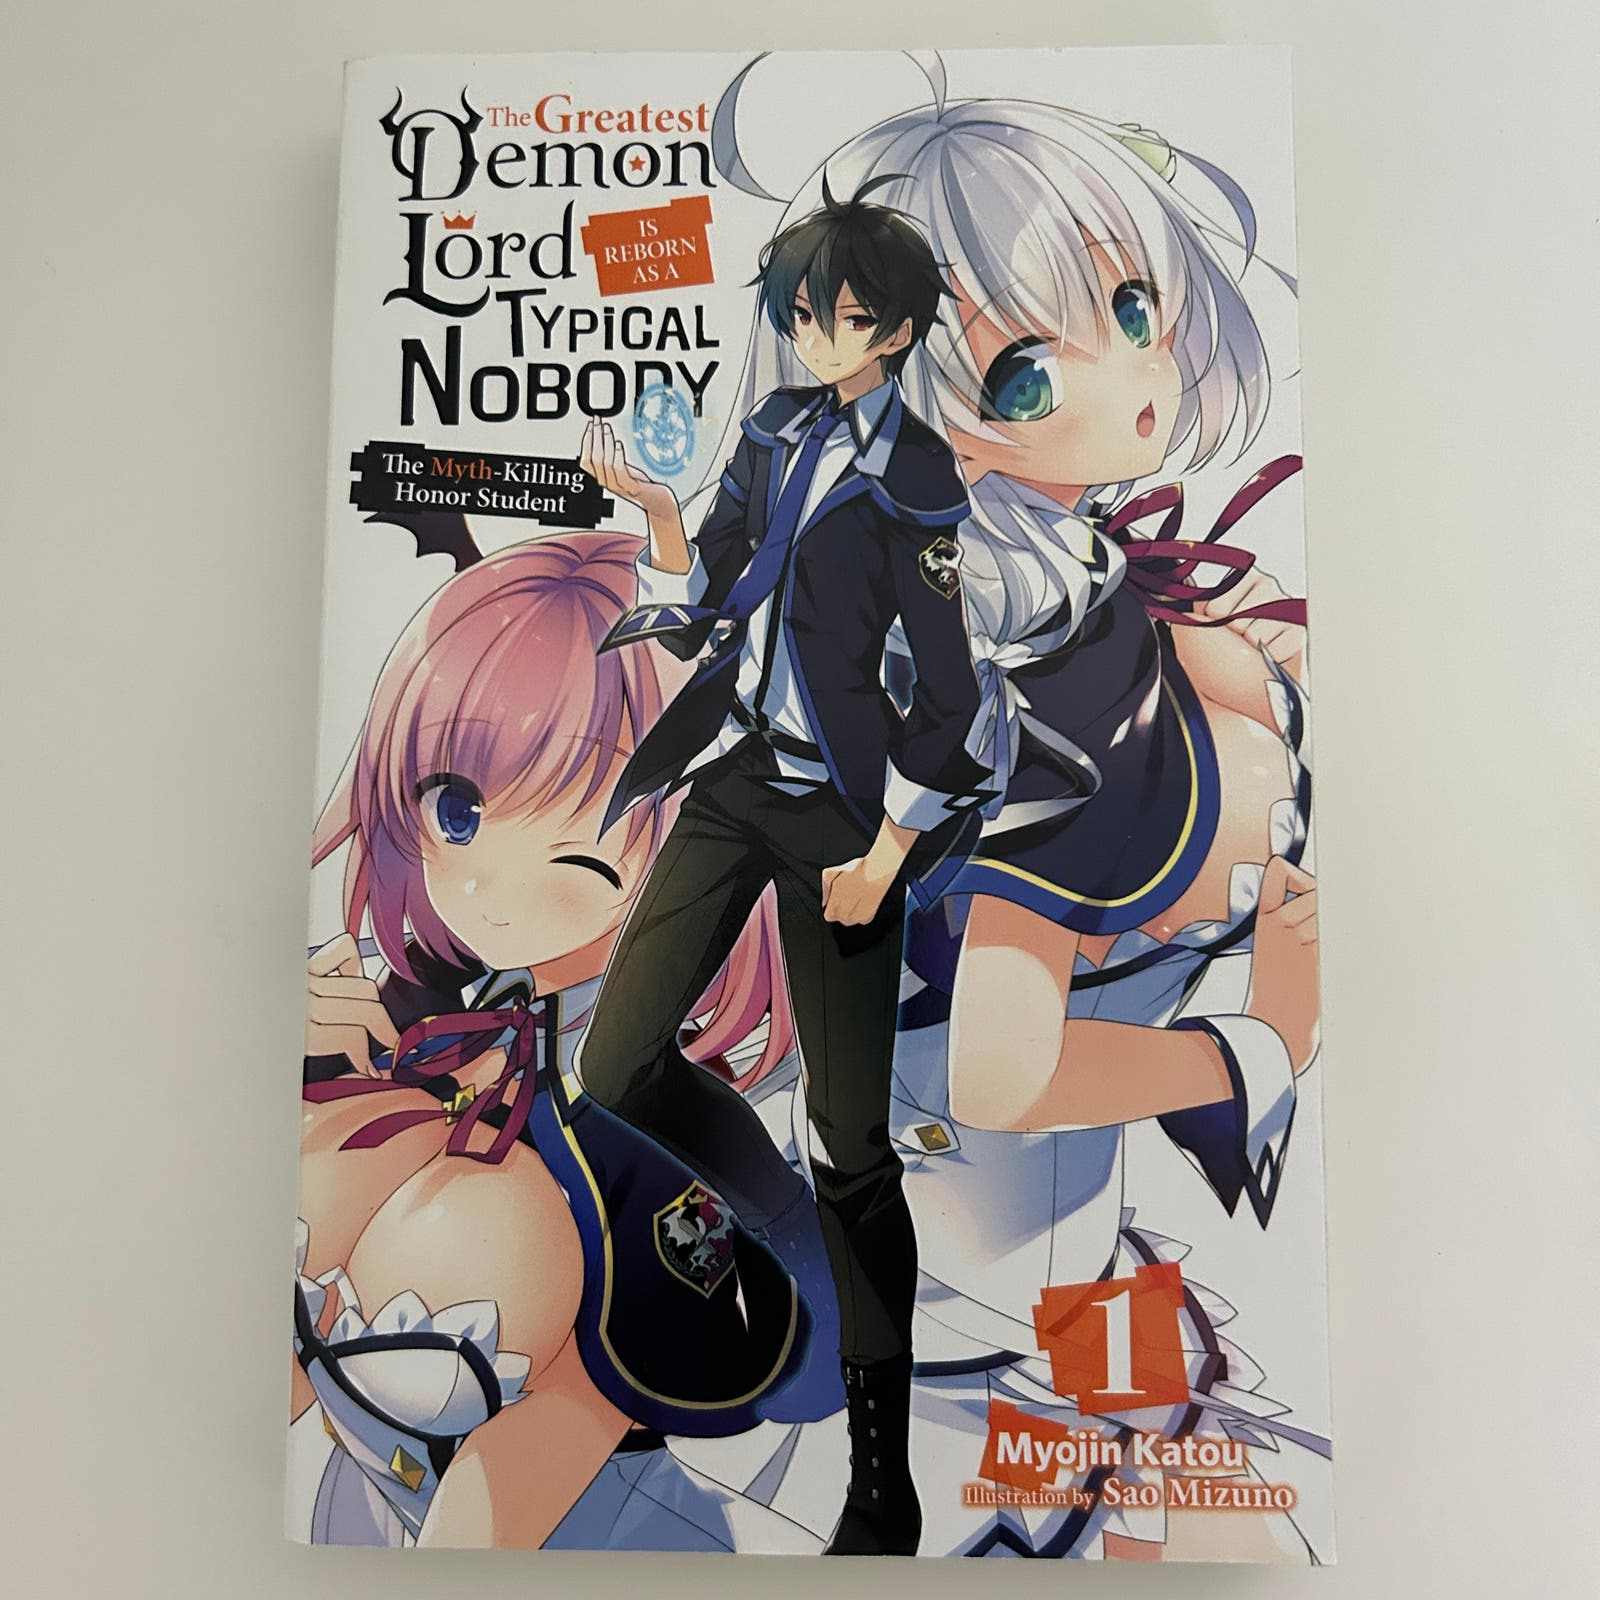 The Greatest Demon Lord Is Reborn as a Typical Nobody vol 1 Manga